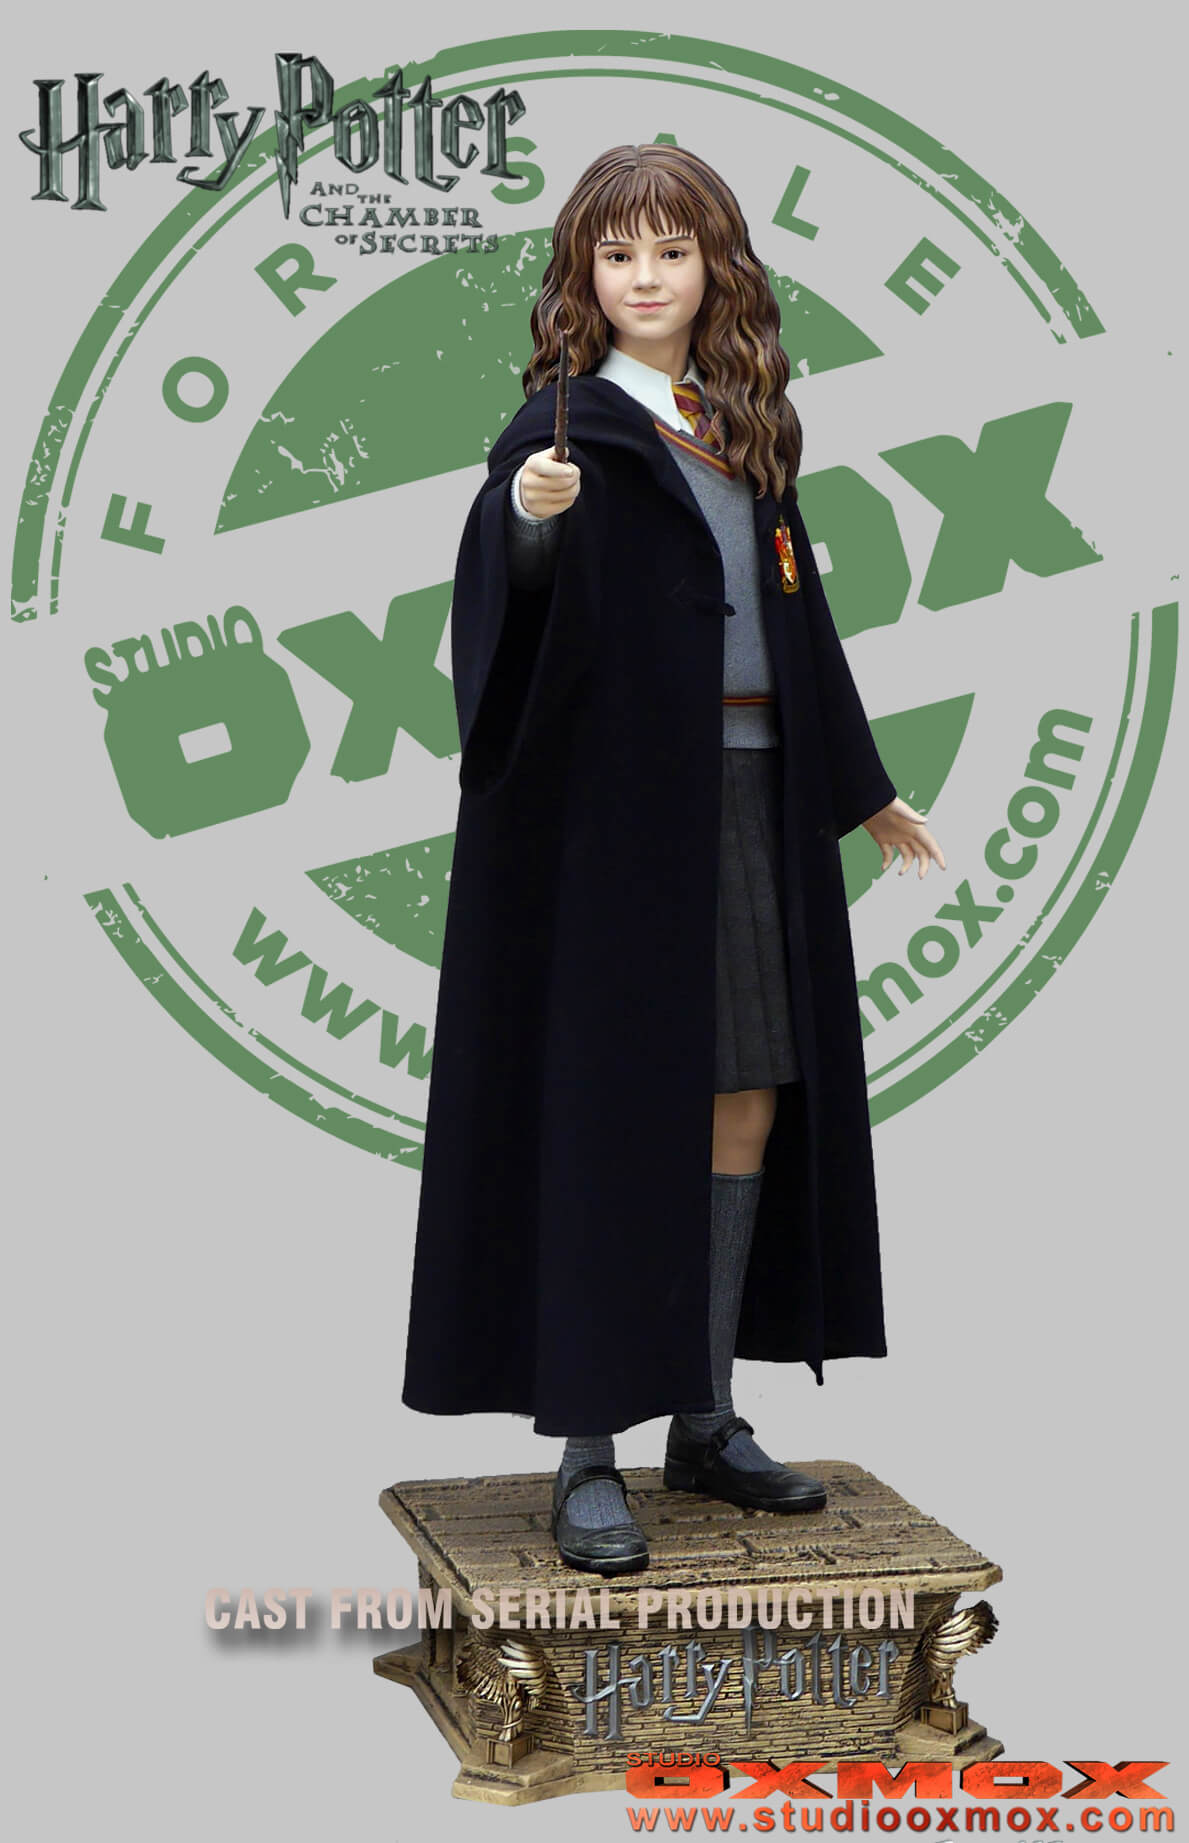 Hermione, Harry Potter, Chamber of Secrets, life size statue